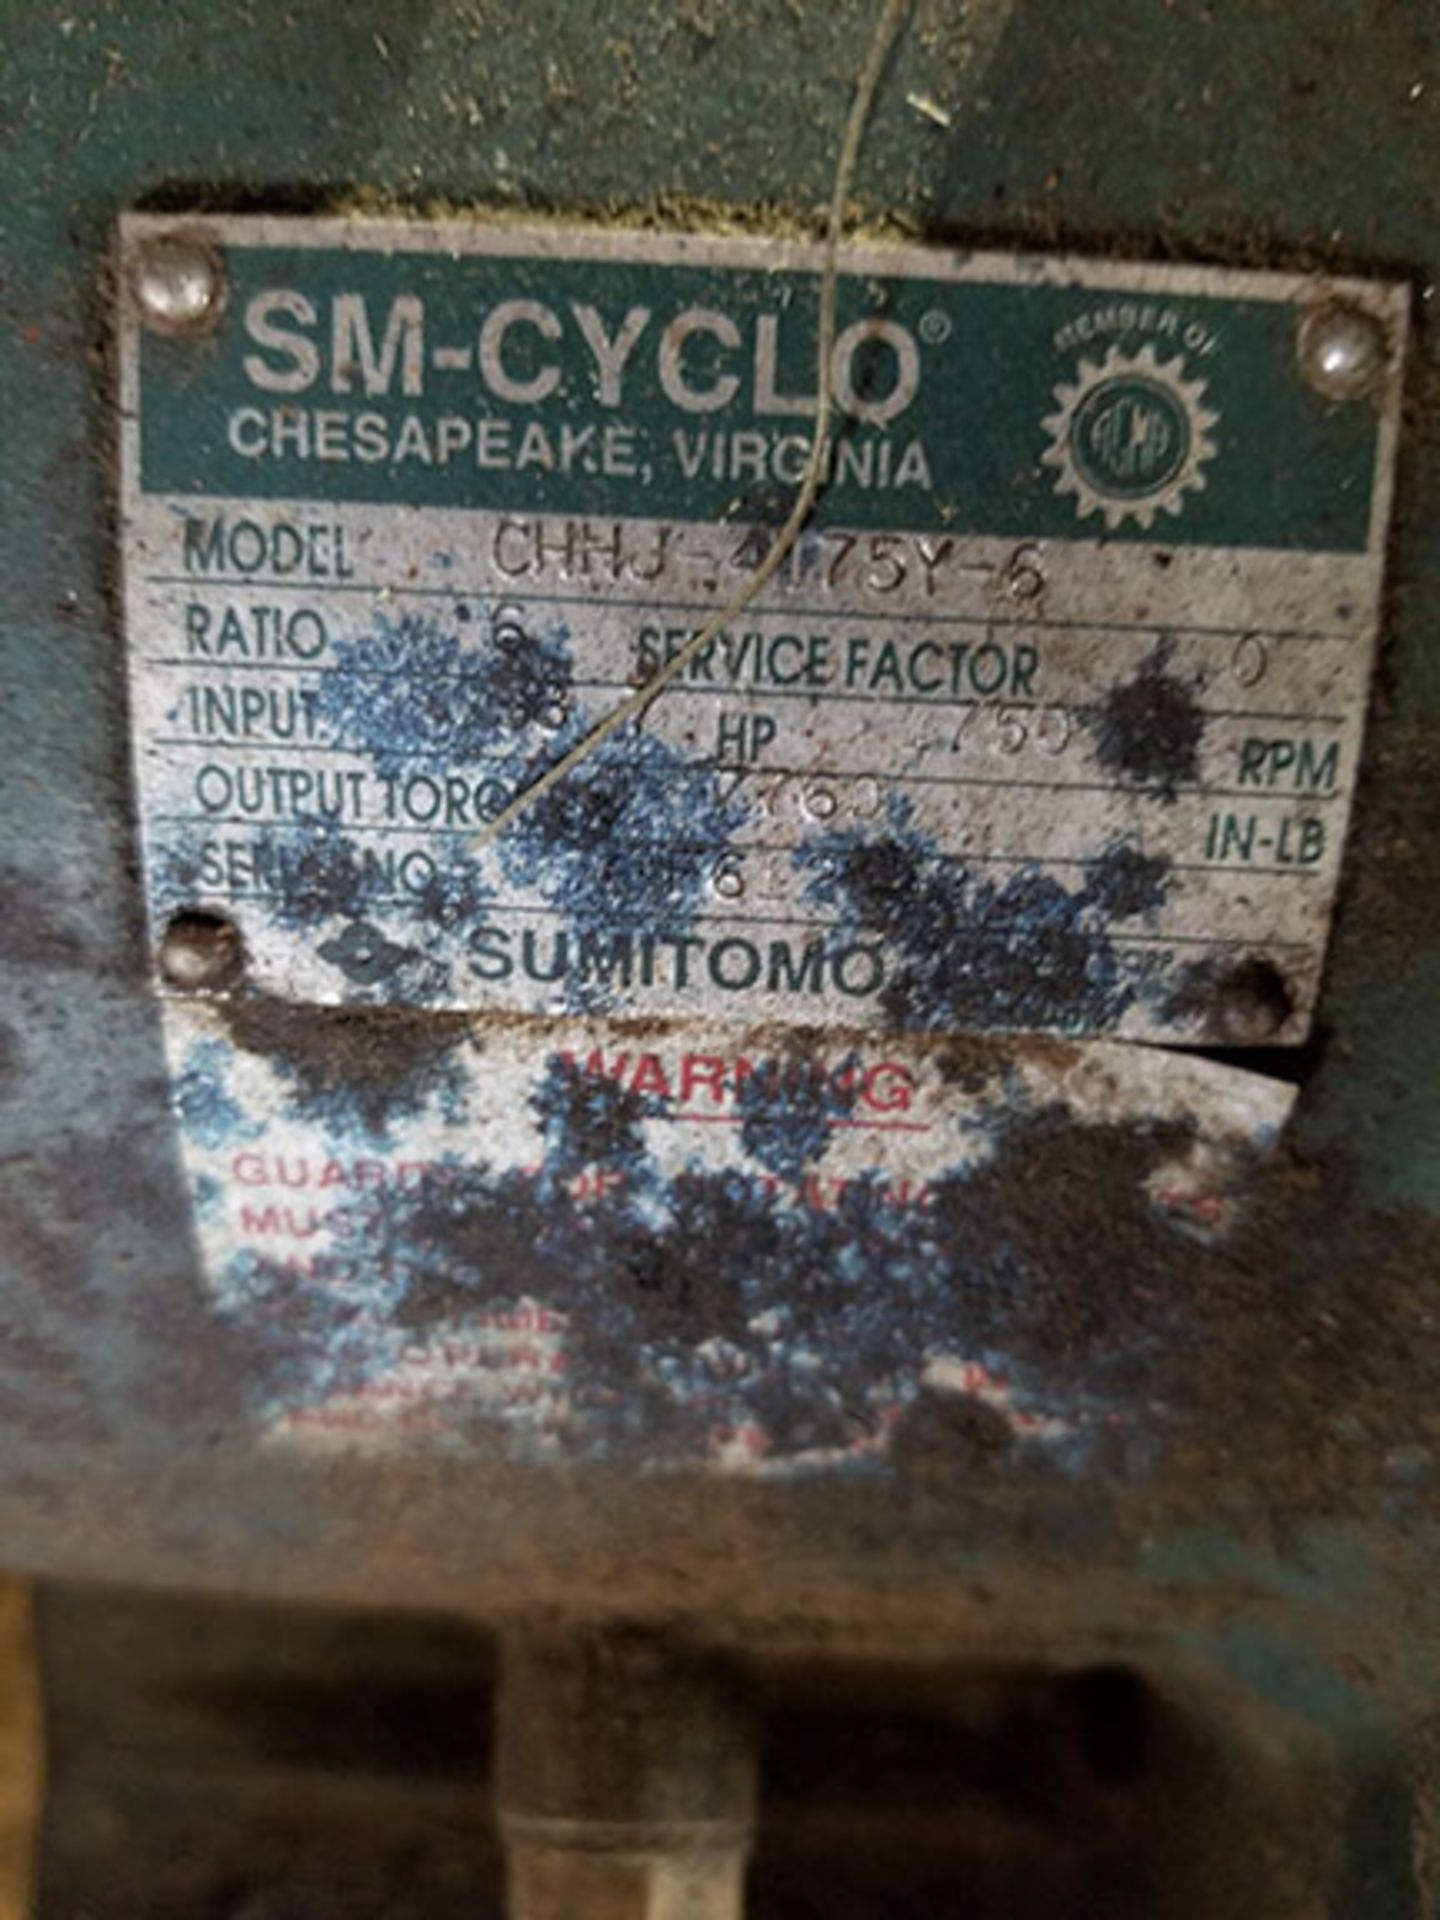 PALLET OF (5) GEAR BOXES / GEAR REDUCER ( SOME WITH SPROCKET GEARS )-  SM-CYCLO, 6 RATIO, 1,750 - Image 14 of 14